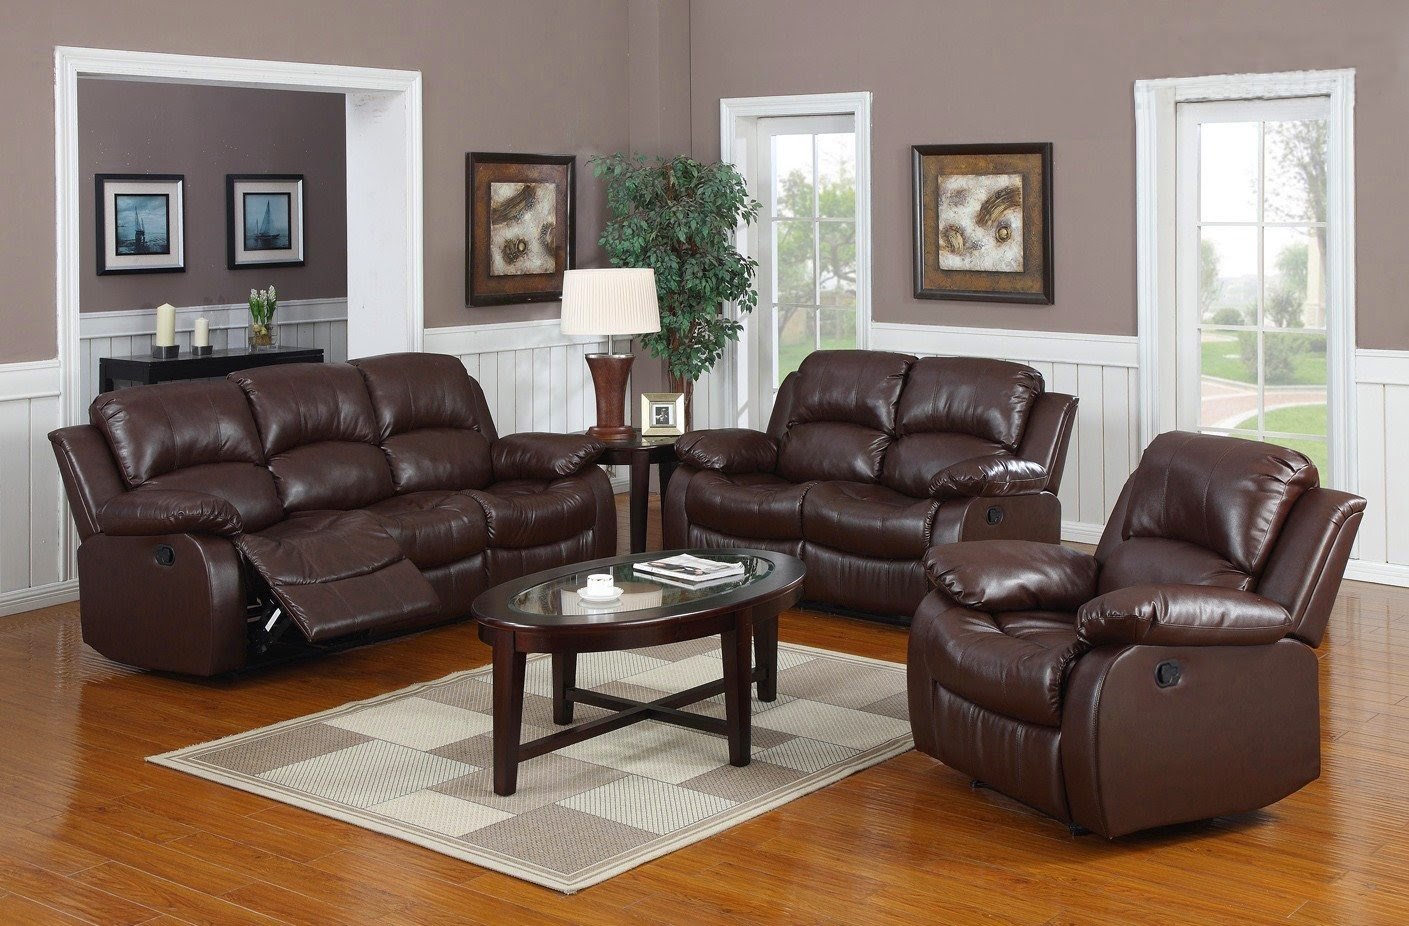 Cheap Reclining Sofas Sale Leather Reclining Sofa Costco